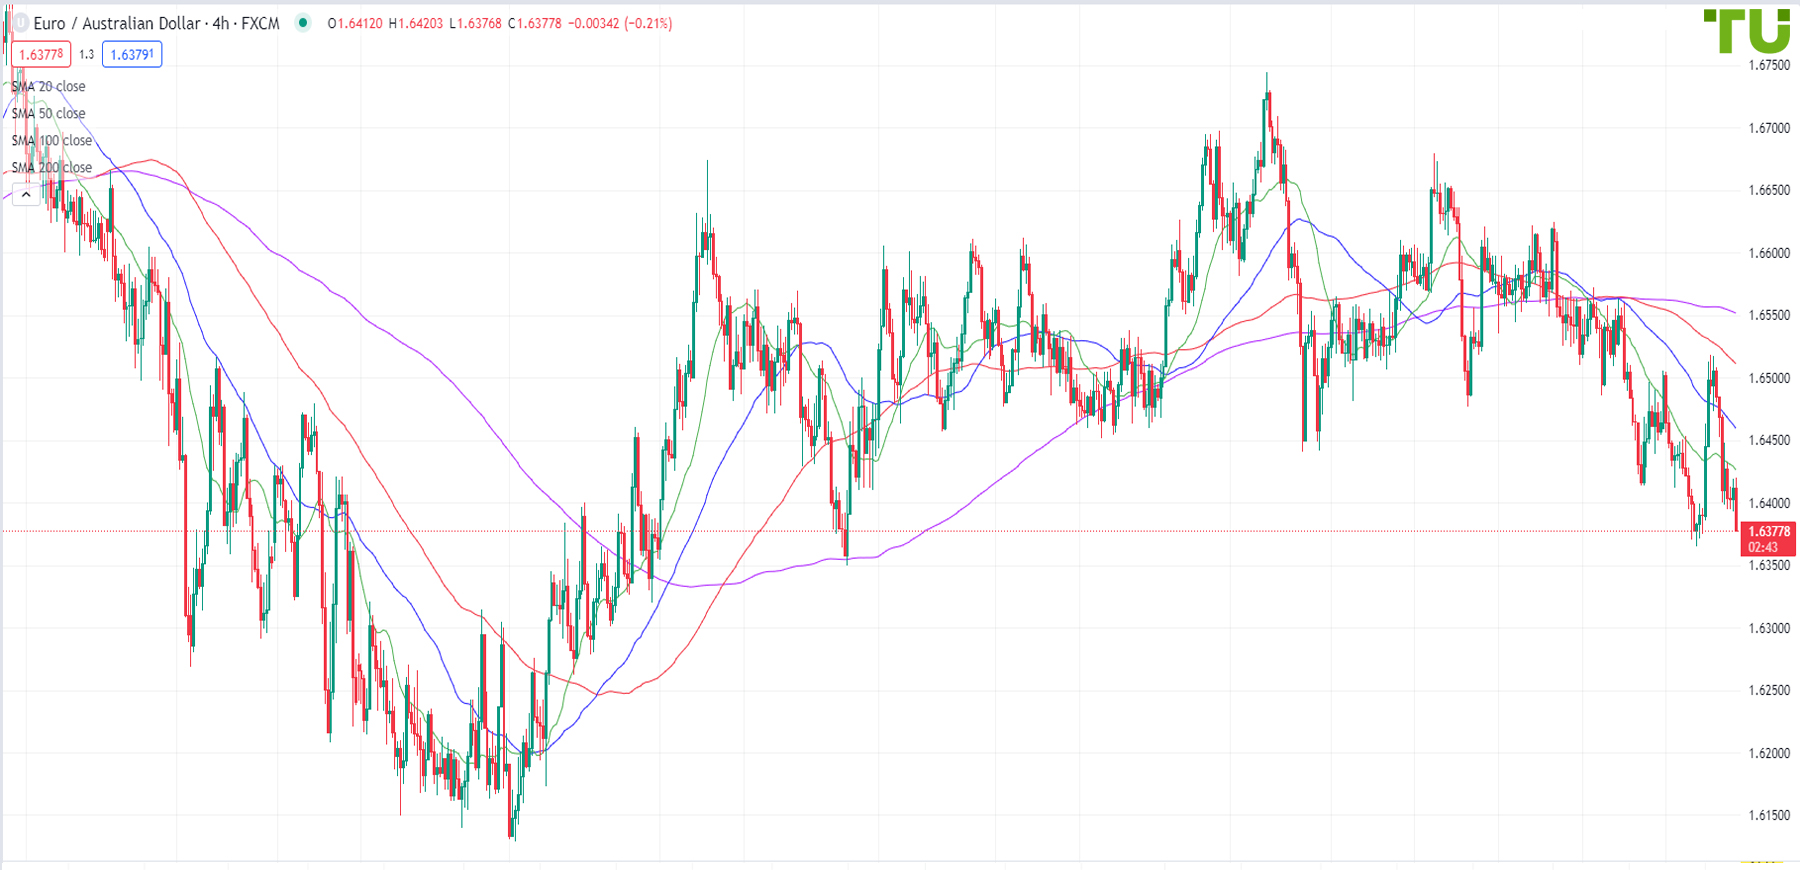 Euro/Aussie redeemed again from 1.6380 support